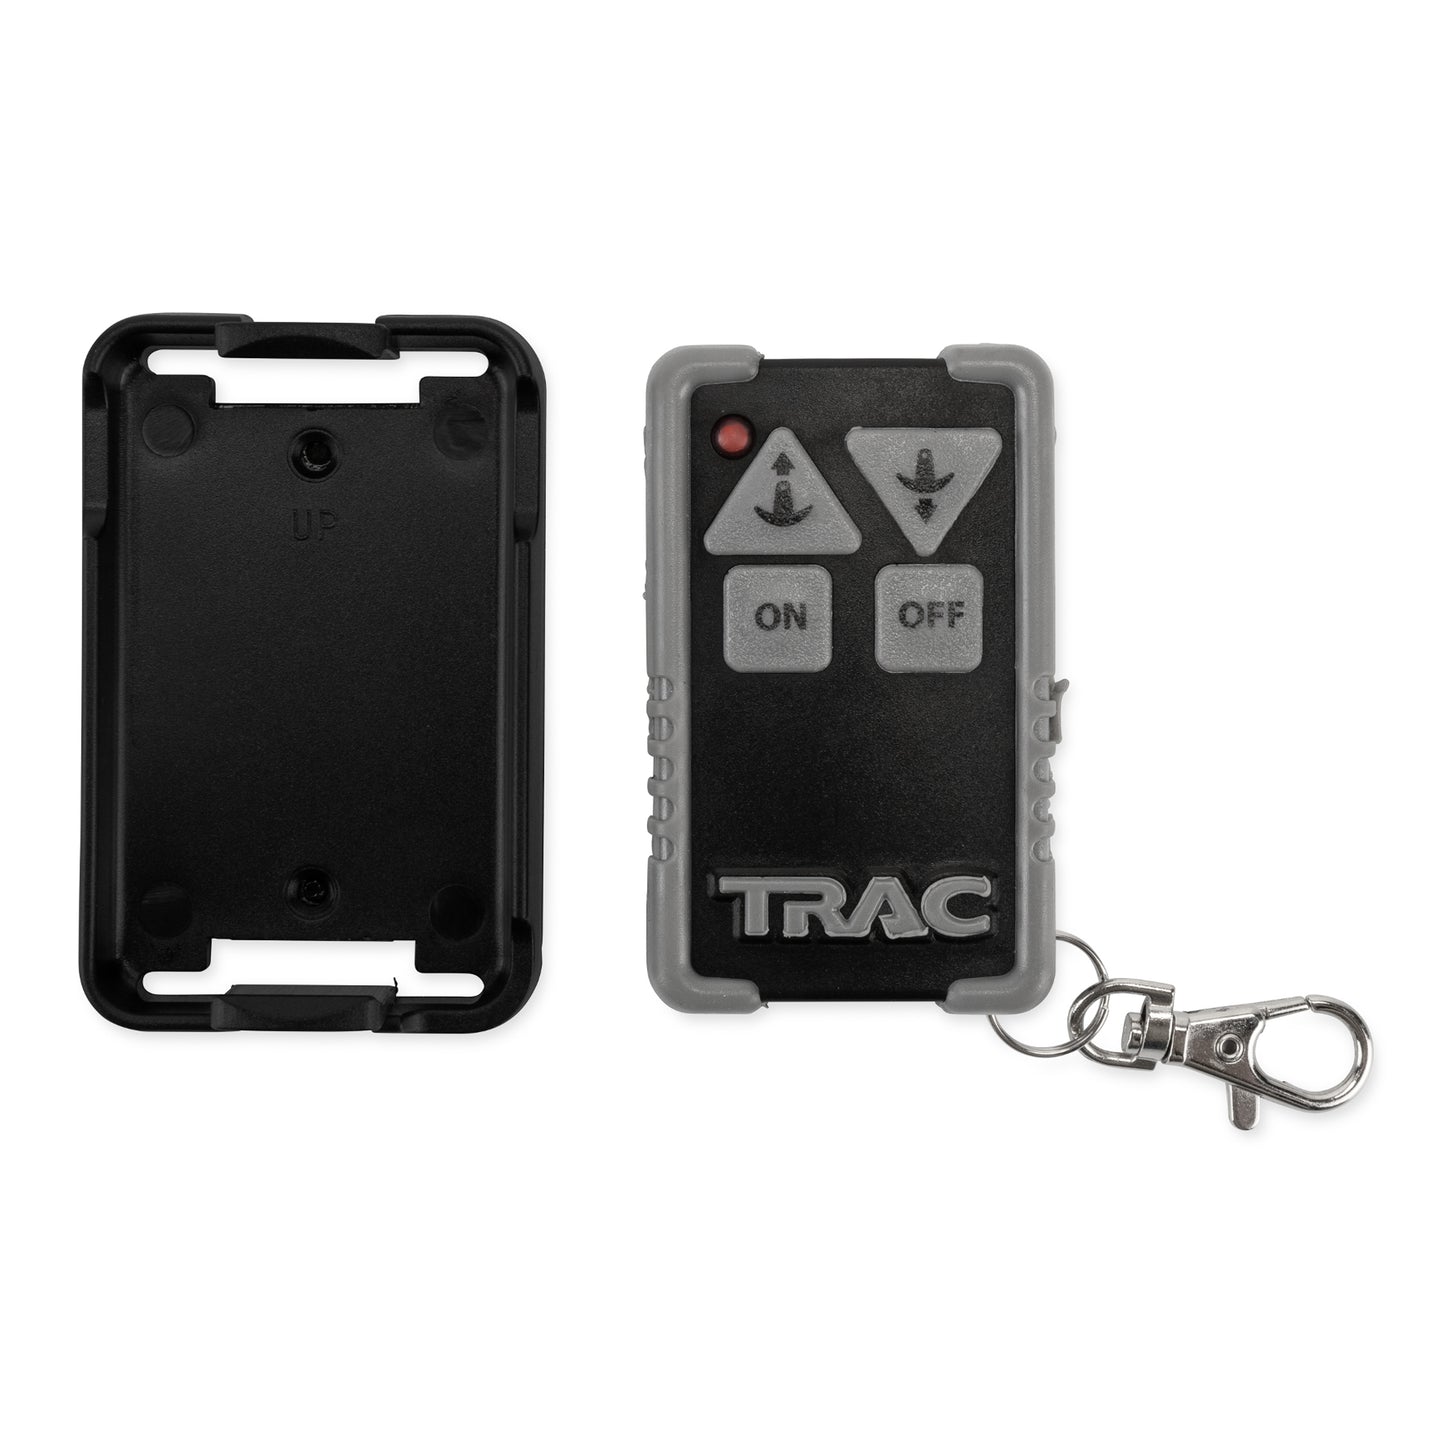 TRAC Outdoors G2 Anchor Winch Wireless Remote Kit